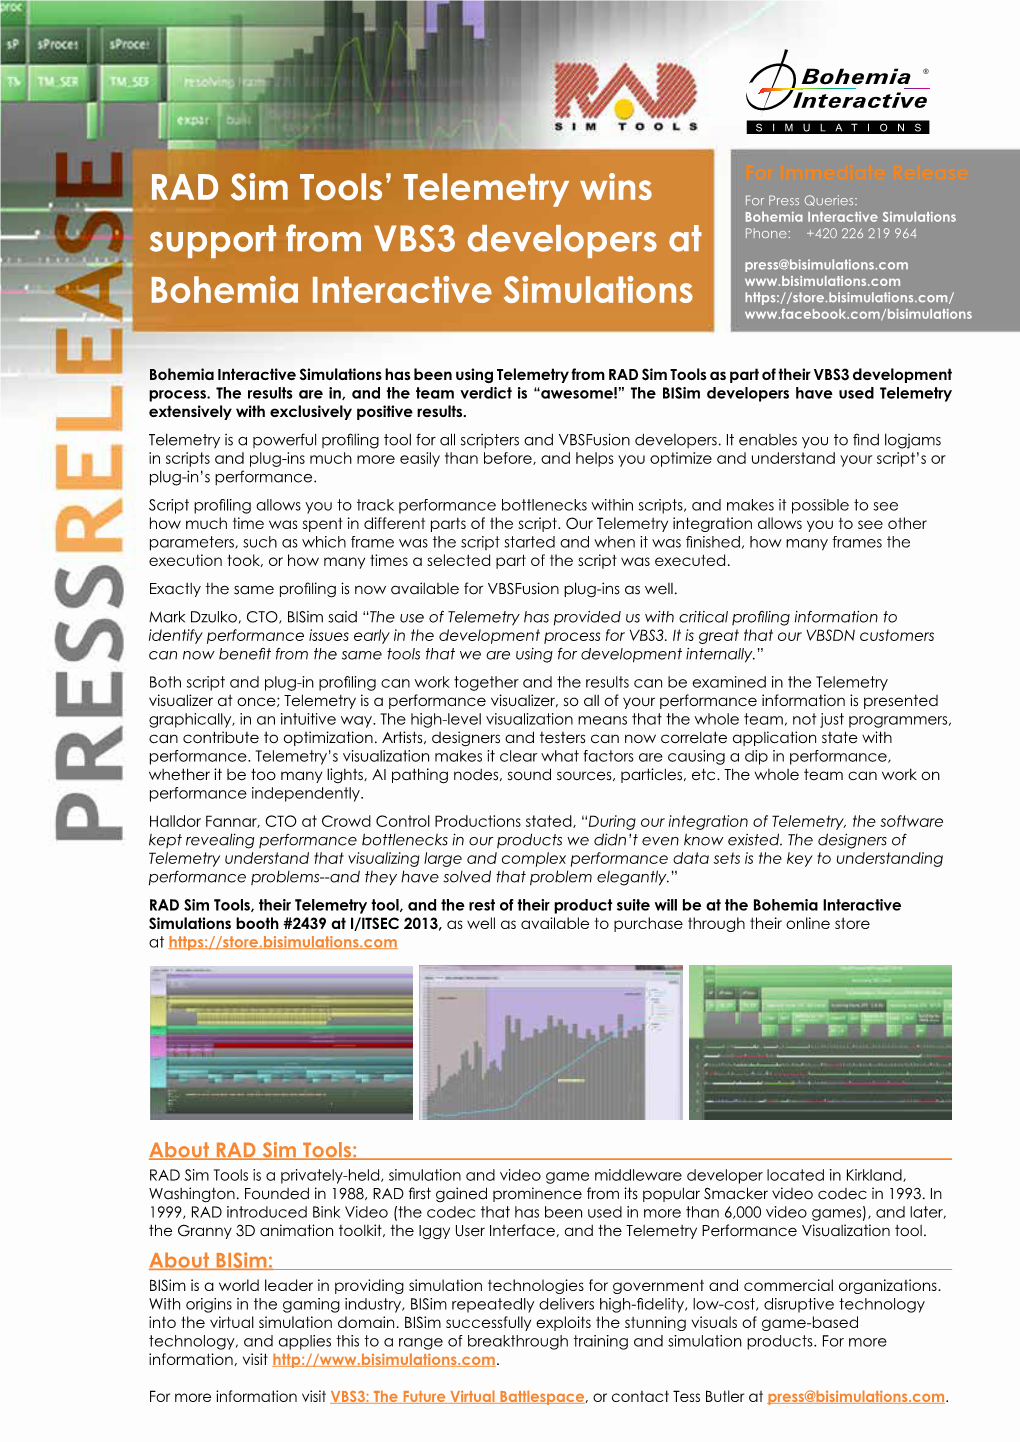 RAD Sim Tools' Telemetry Wins Support from VBS3 Developers At